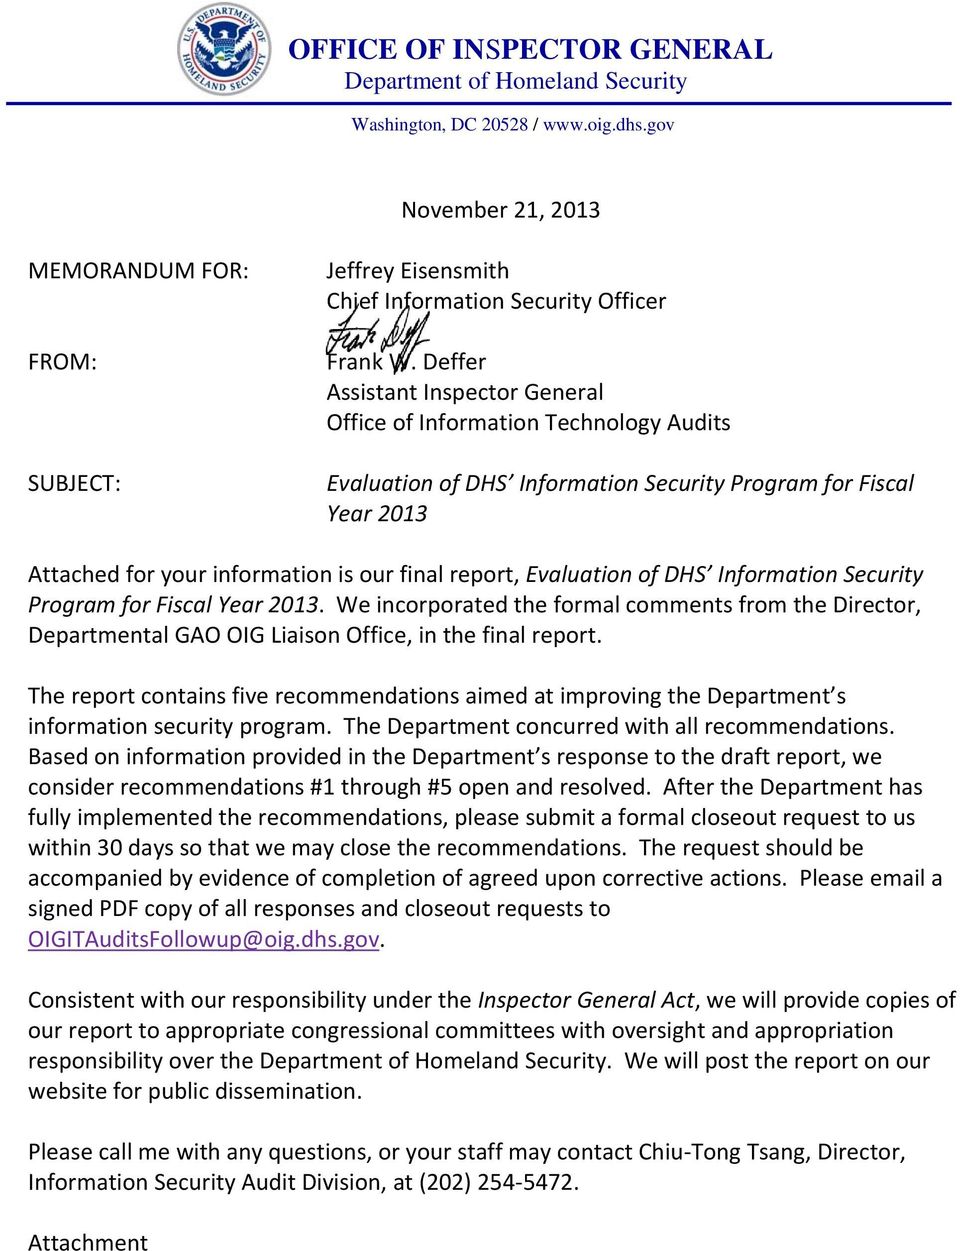 Evaluation of DHS Information Security Program for Fiscal Year 2013. We incorporated the formal comments from the Director, Departmental GAO OIG Liaison Office, in the final report.